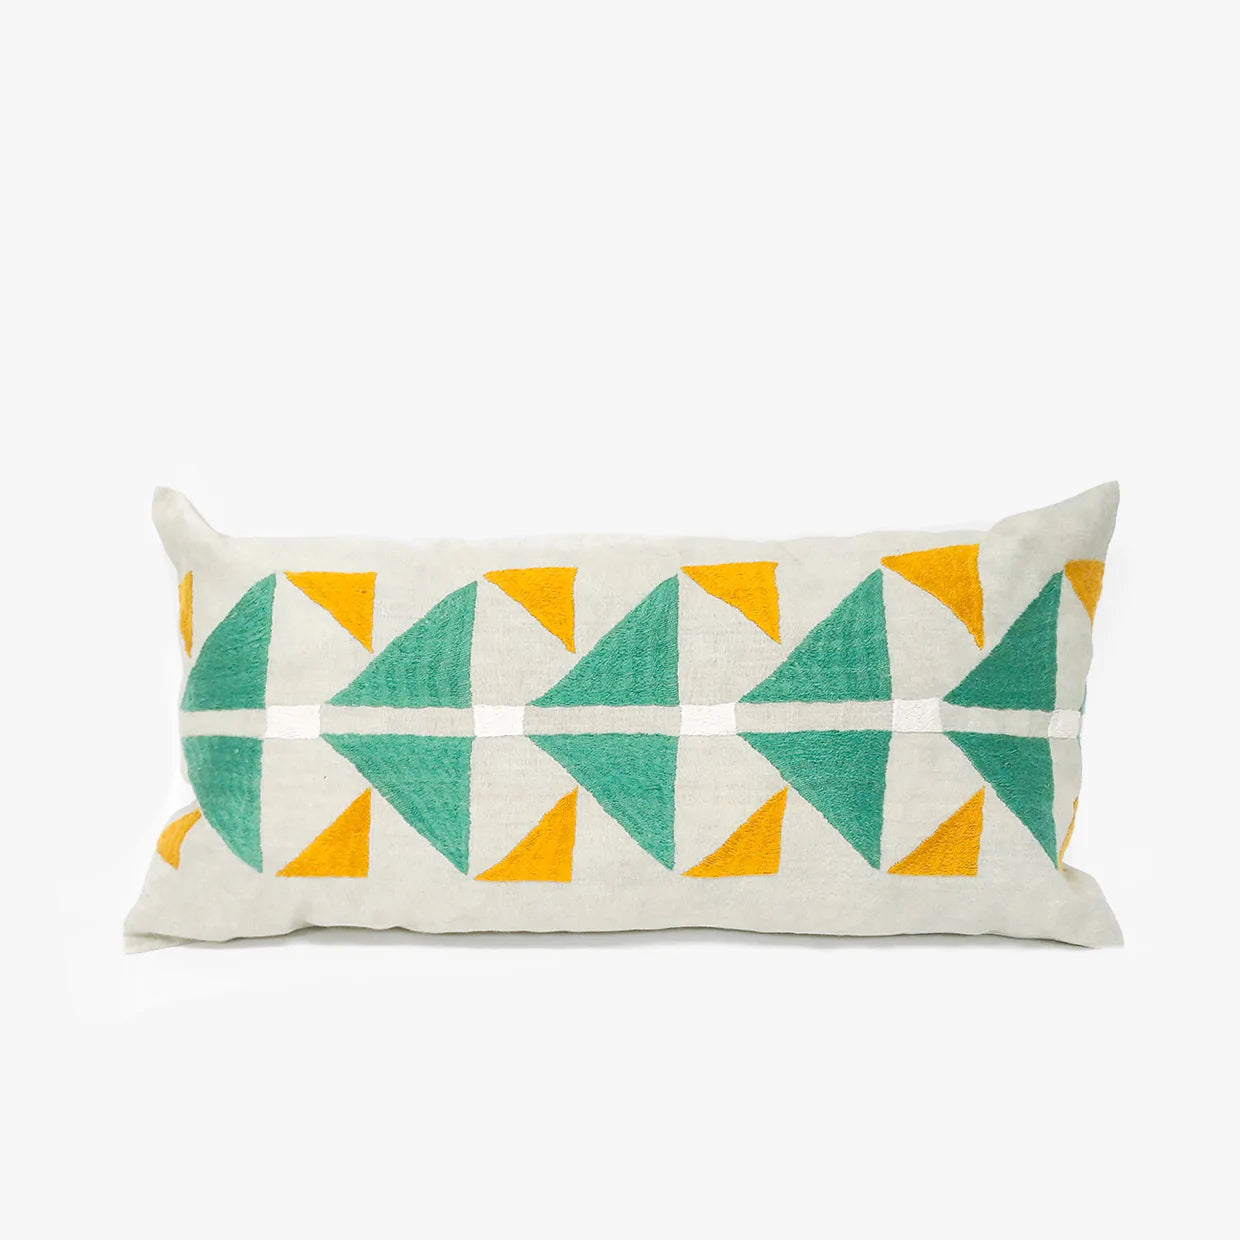 Artisans Link Made51 Rectangle Pukhtadozi Cushion in Green